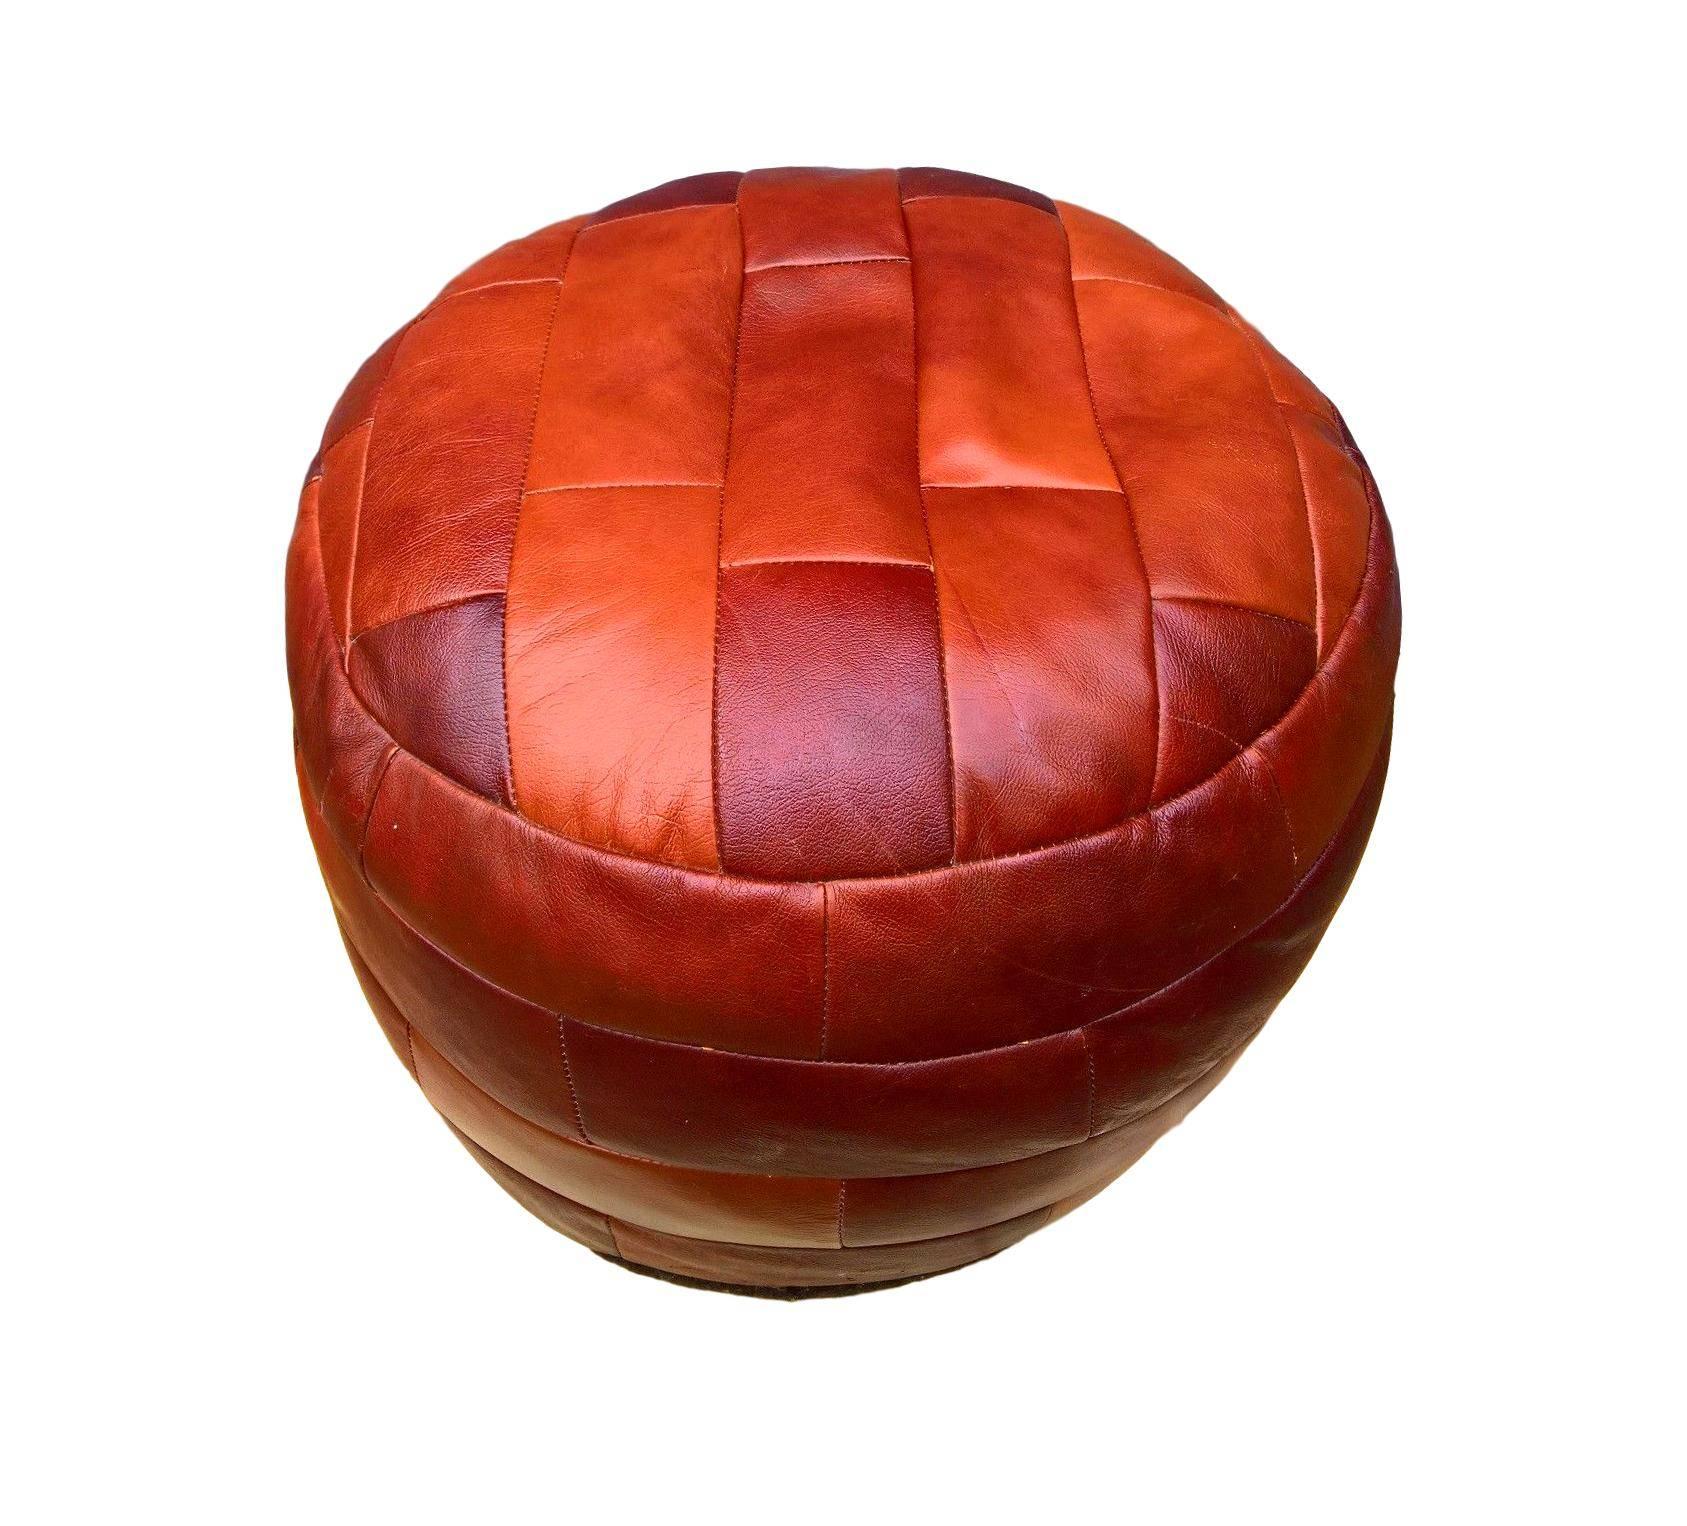 Gorgeous patchwork leather pouf by De Sede. Great cognac coloring and great patina to leather. Excellent condition.

Similar light tan De Sede patchwork pouf available in separate listing.